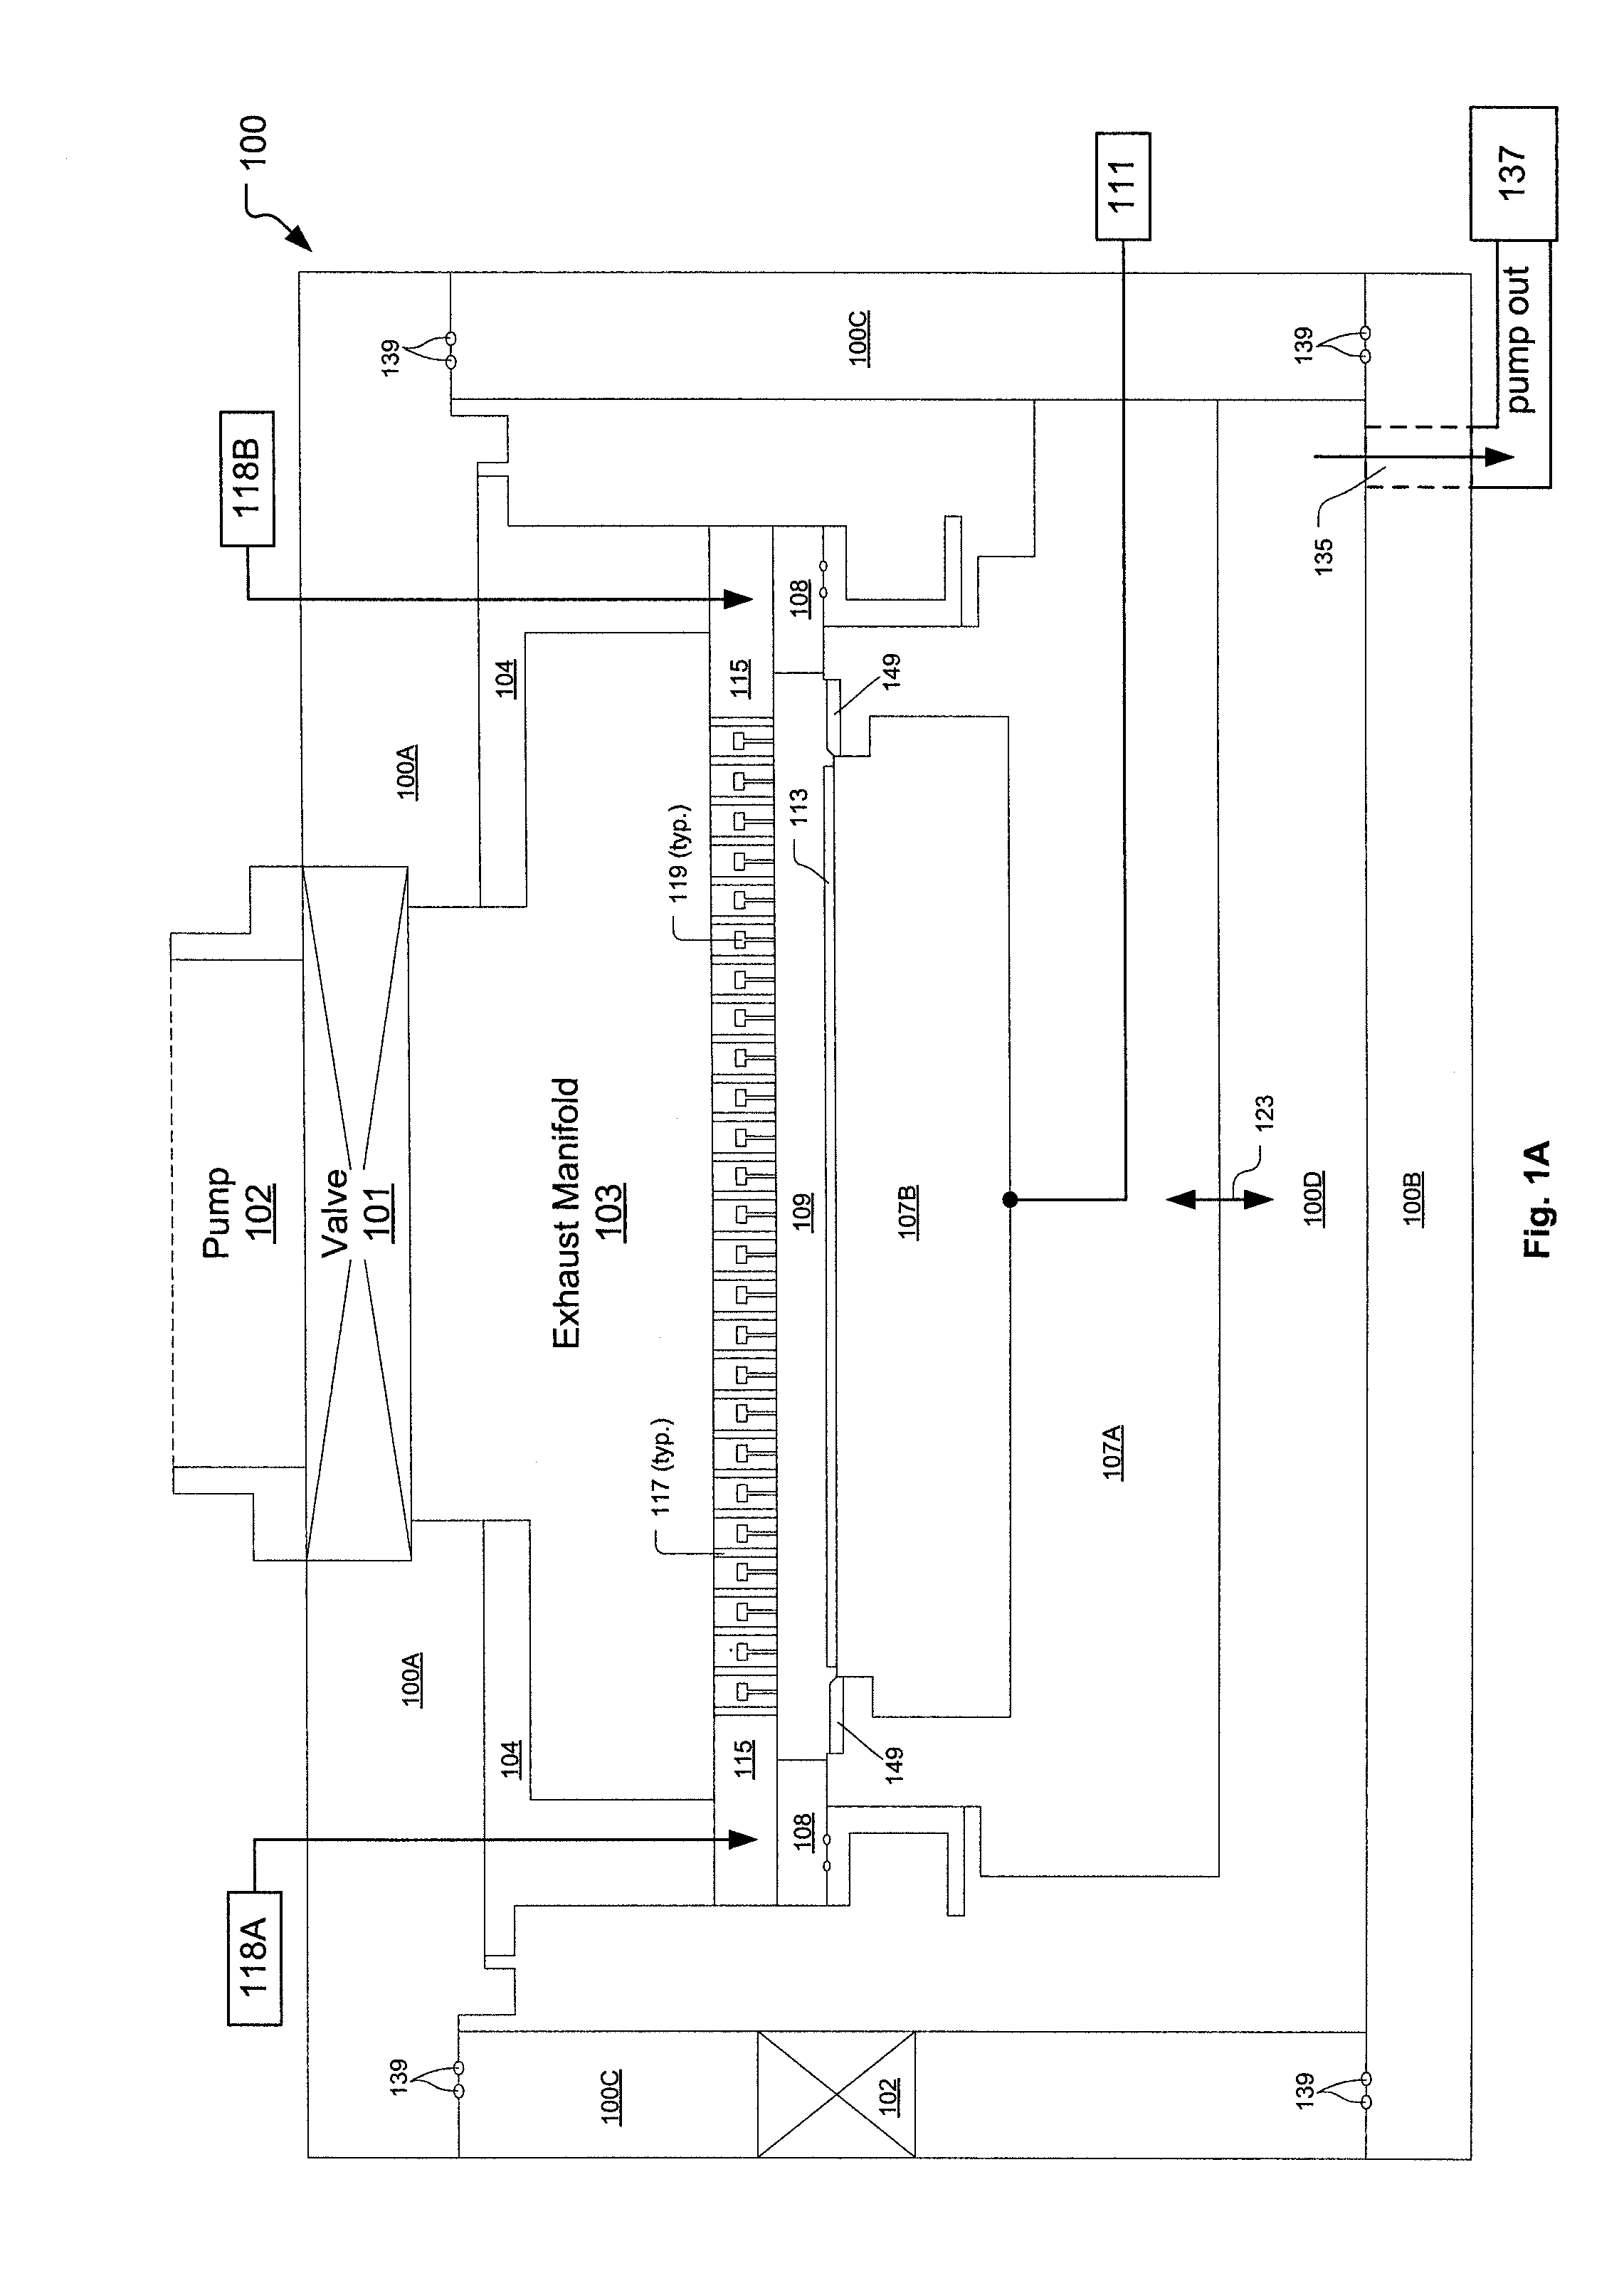 Plasma Processing Chamber with Dual Axial Gas Injection and Exhaust